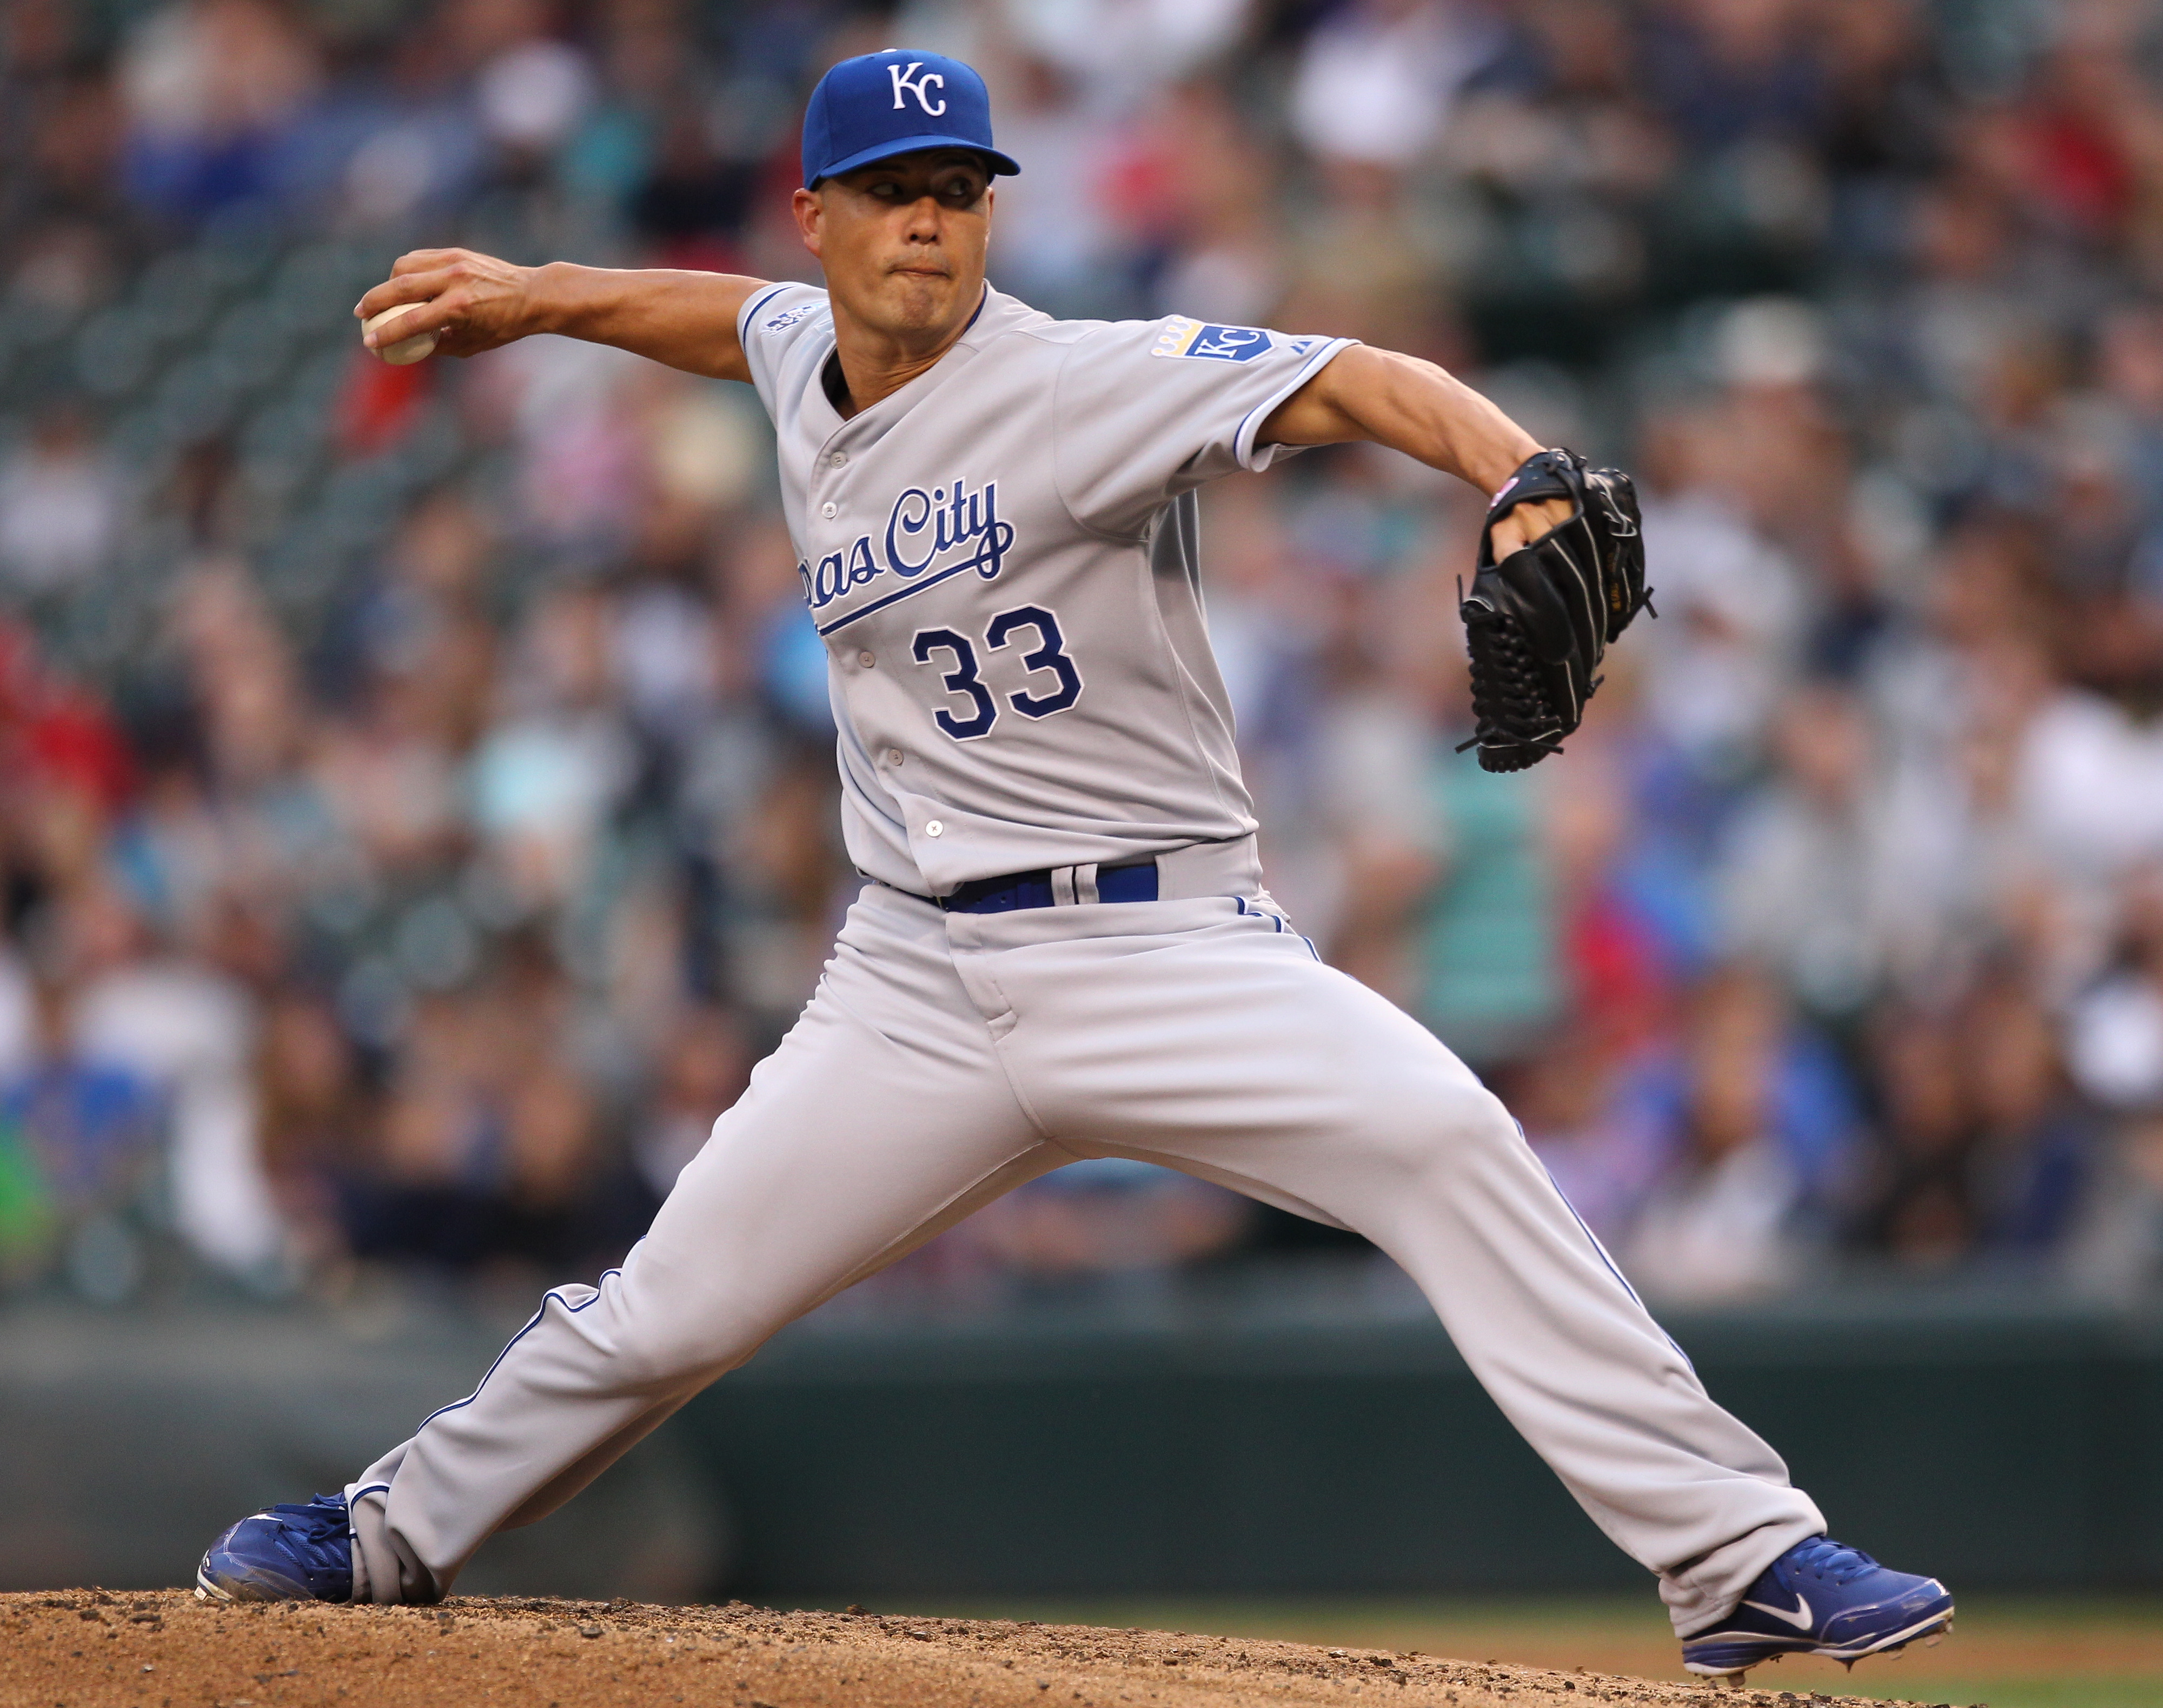 SEATTLE, WA - JULY 27:  Starter Jeremy Guthrie #33 of the Kansas City Royals pitches against the Seattle Mariners at Safeco Field on July 27, 2012 in Seattle, Washington.  (Photo by Otto Greule Jr/Getty Images)